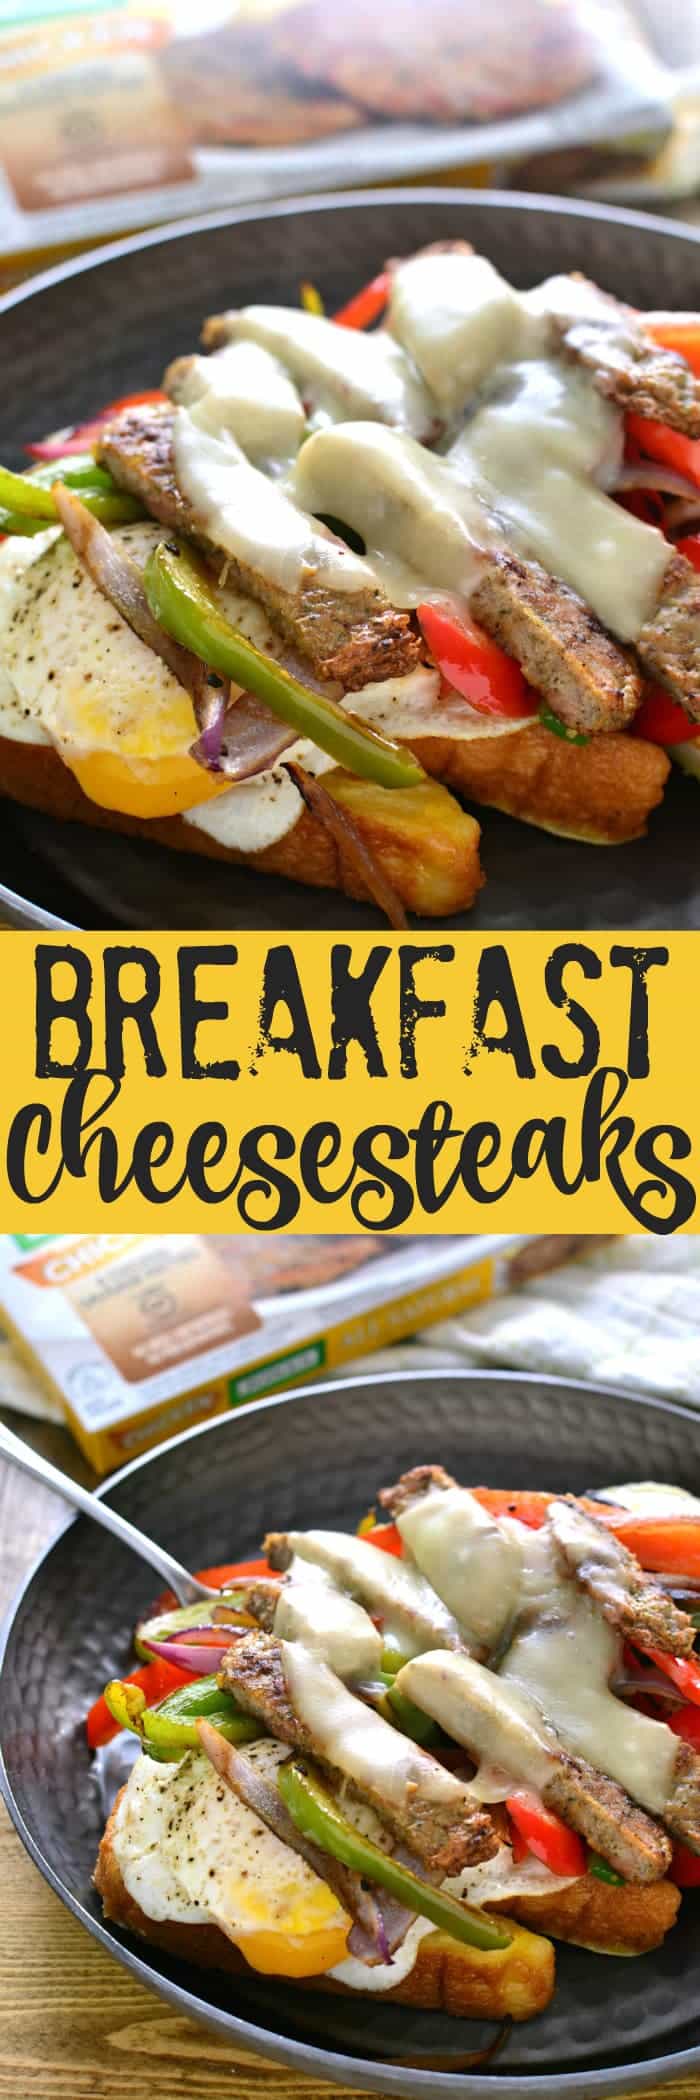 These Breakfast Cheesesteaks are everything you could want in a breakfast sandwich! They start with French toast and are topped with eggs, peppers, onions, cheese, and Jones Dairy Farm Chicken Sausage Patties. Perfect for breakfast, brunch, or brinner!